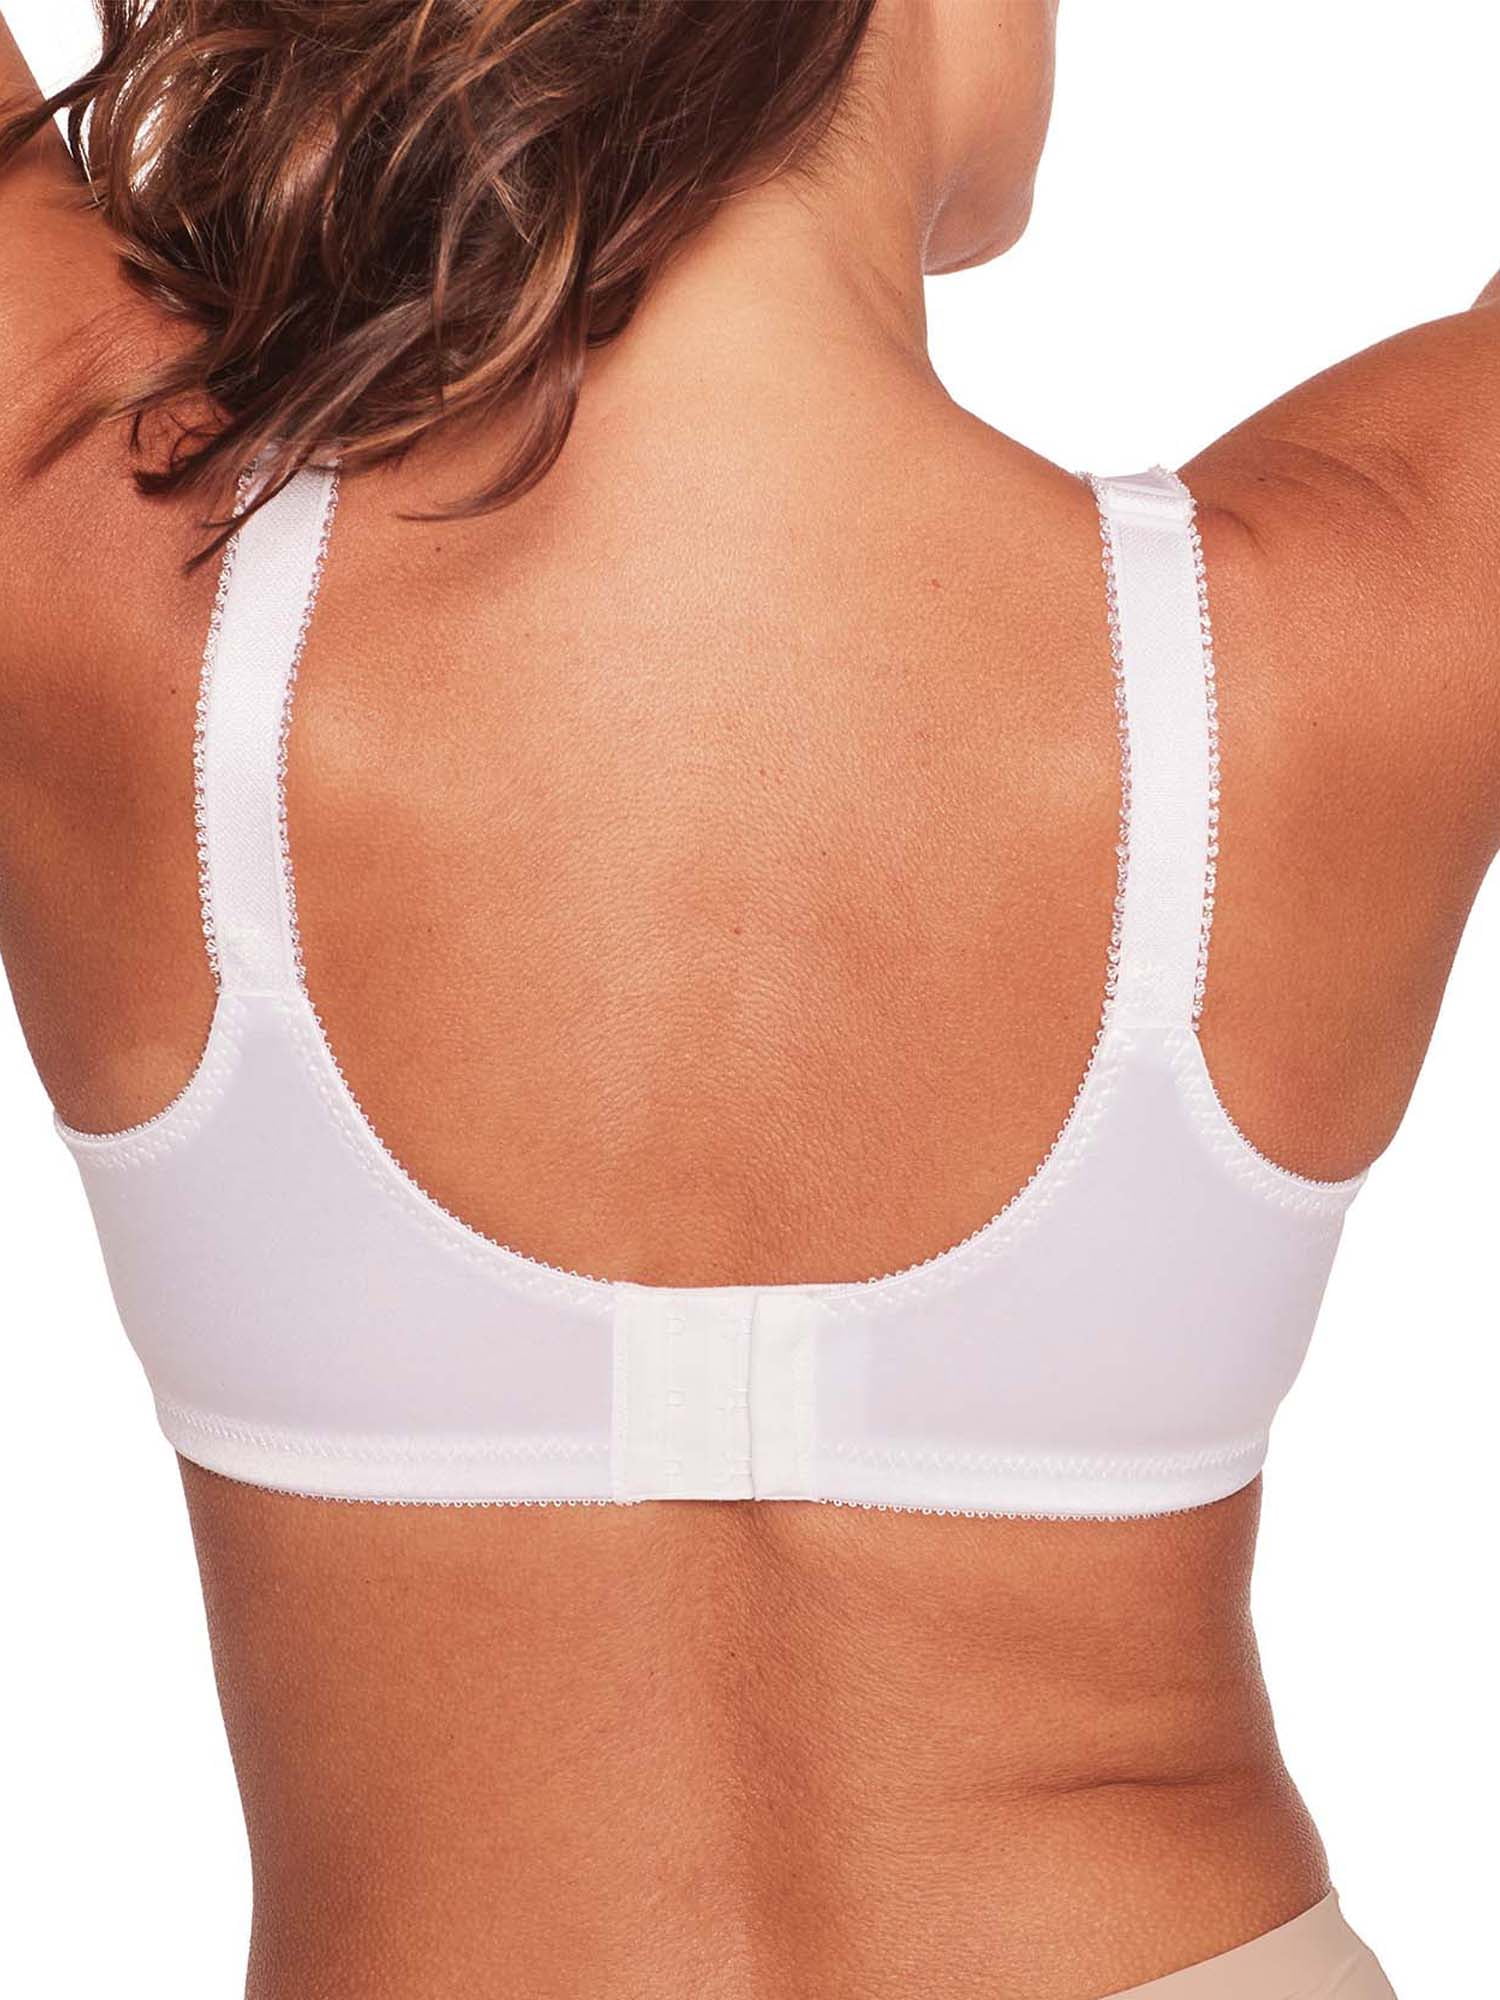 Bali 3820 Double Support Wirefree Bra Size 36C, White 